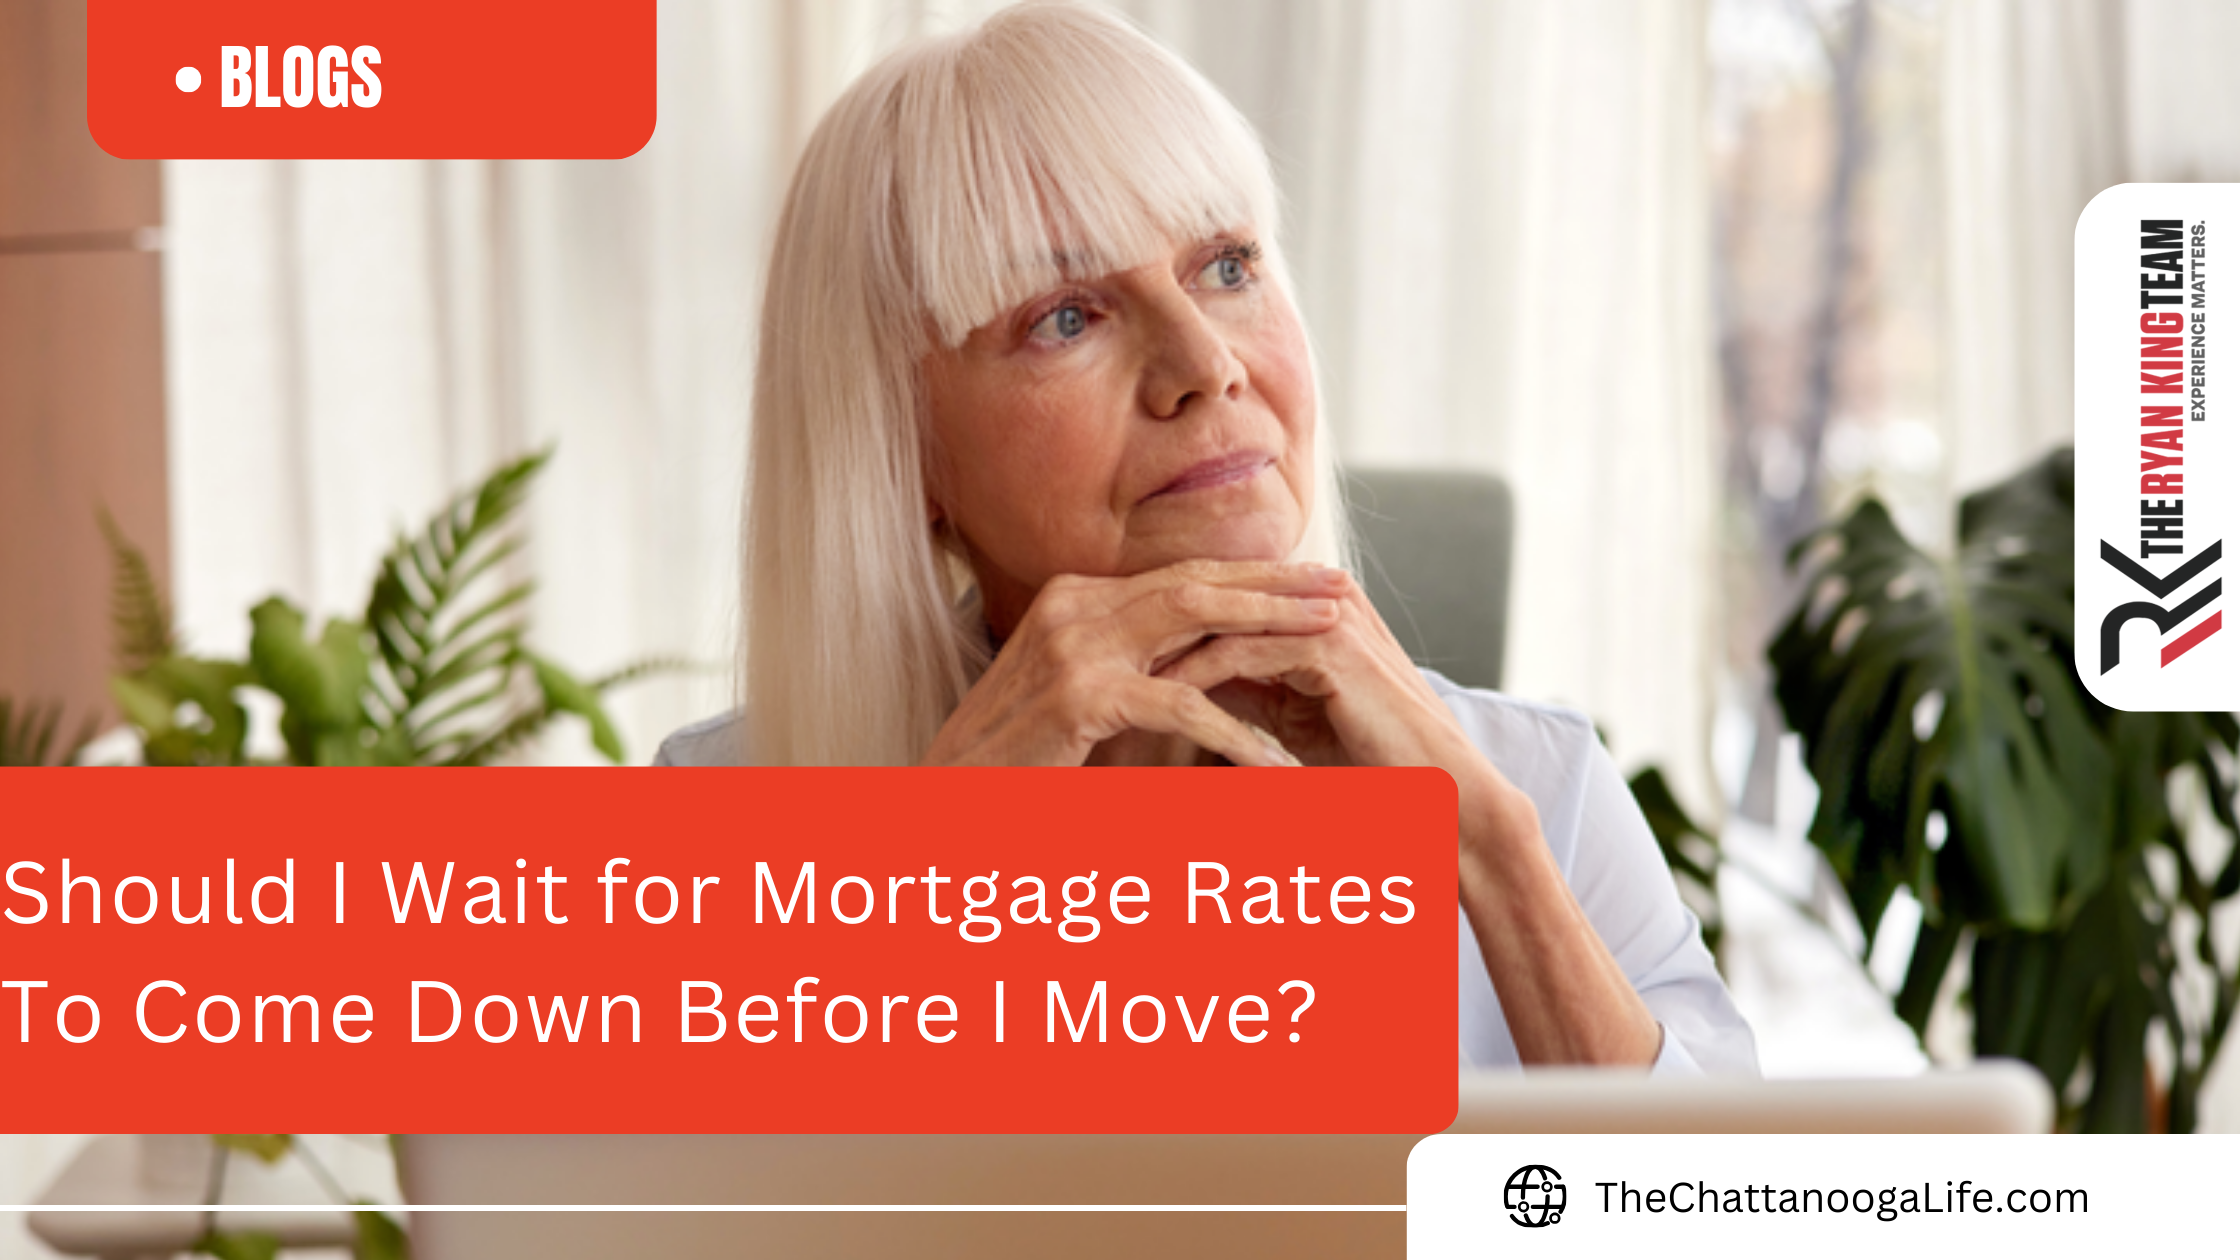 Should I Wait for Mortgage Rates To Come Down Before I Move?